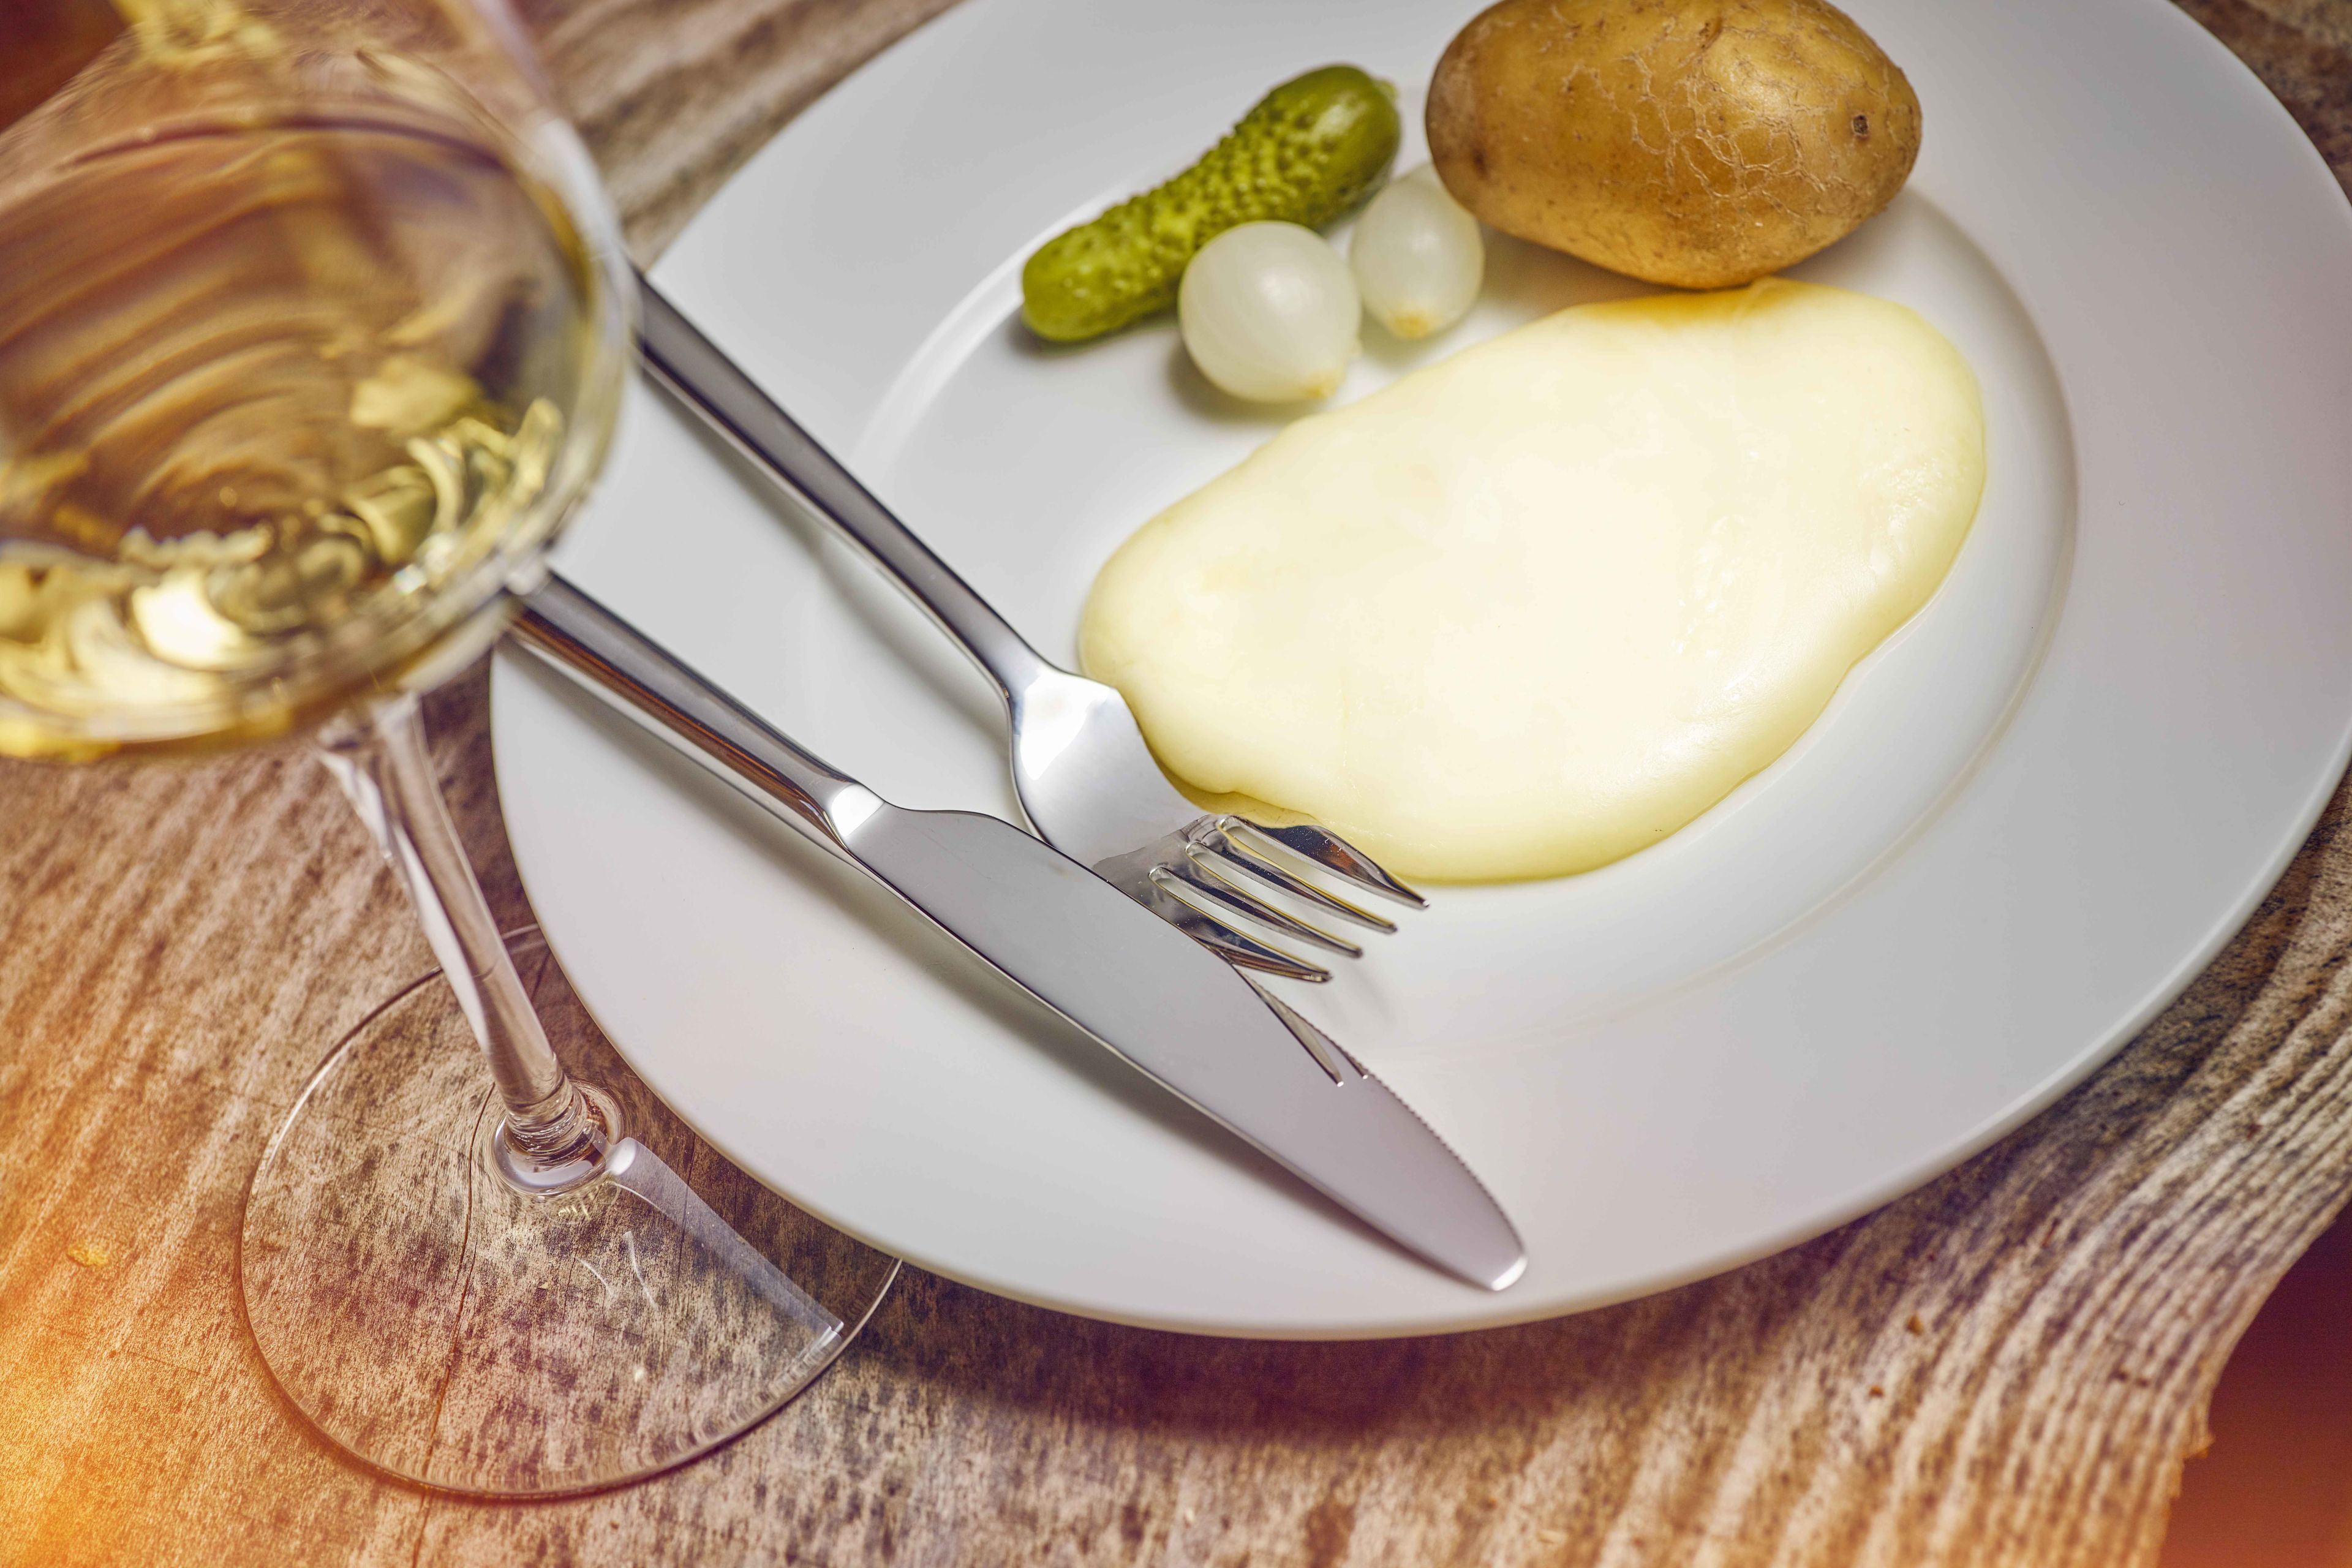 Melted raclette cheese with potatoes, gherkins and onions in Valais, Switzerland